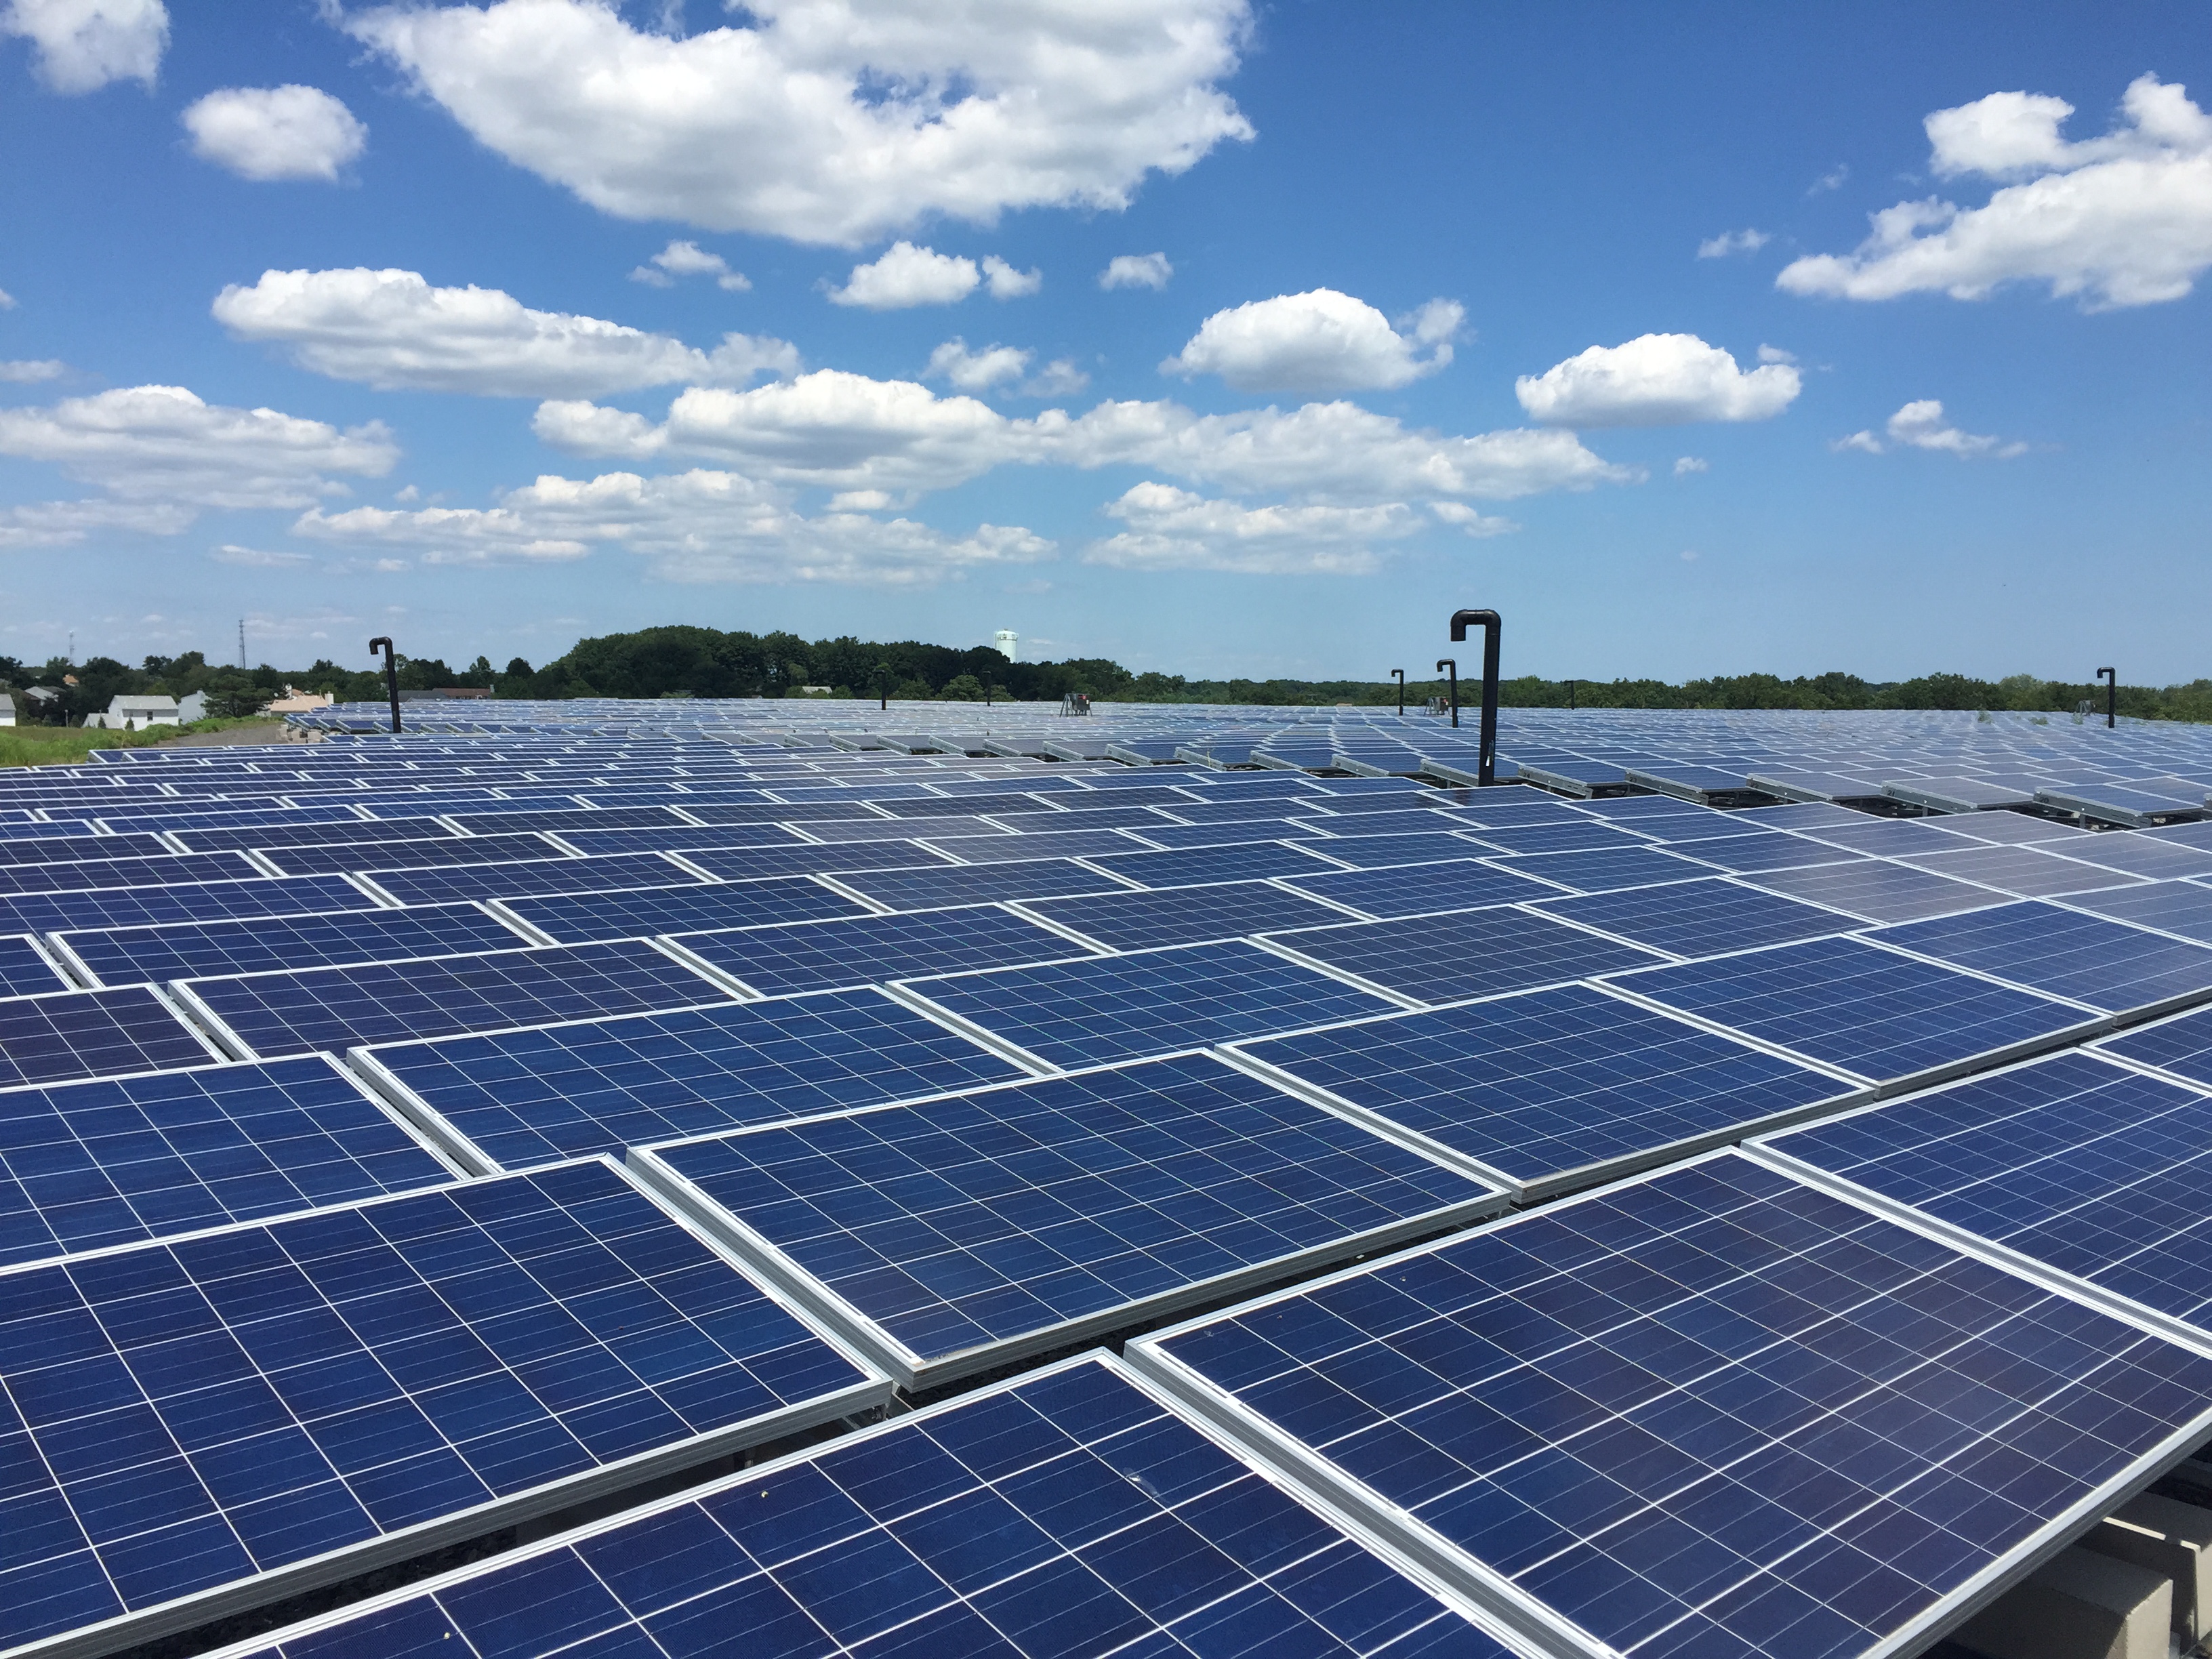 A solar field built at the former French's Landfill site in Brick Township. (Photo: Daniel Nee)